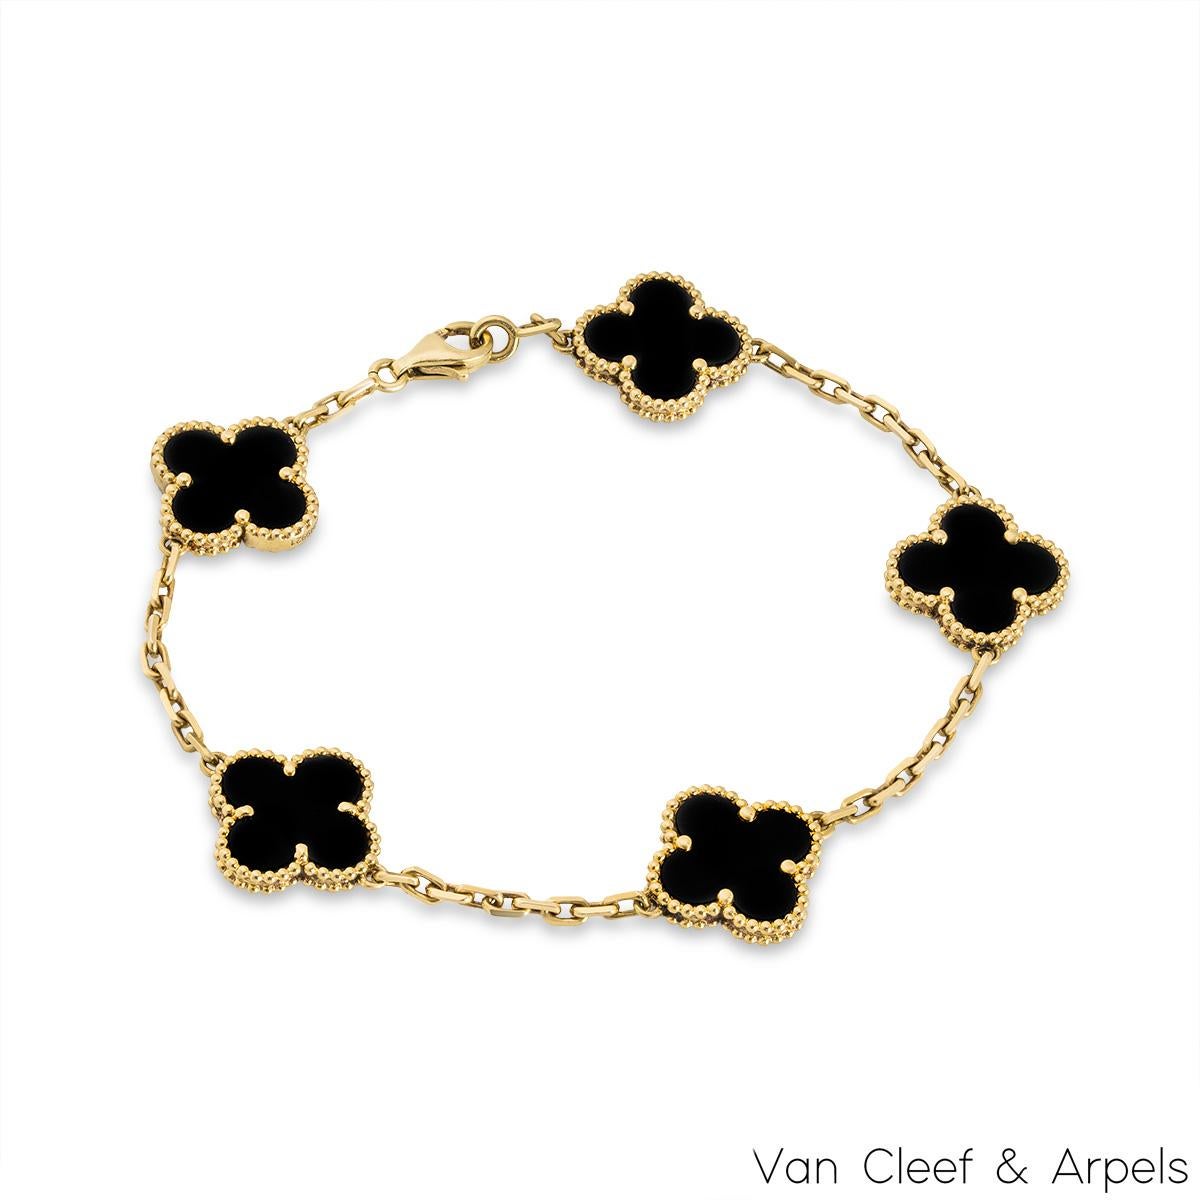 A timeless 18k yellow gold onyx bracelet from the Vintage Alhambra collection by Van Cleef and Arpels. The bracelet is made up of 5 iconic clover motifs, each set with a beaded edge and a black onyx inlay, set throughout the length of the chain. The